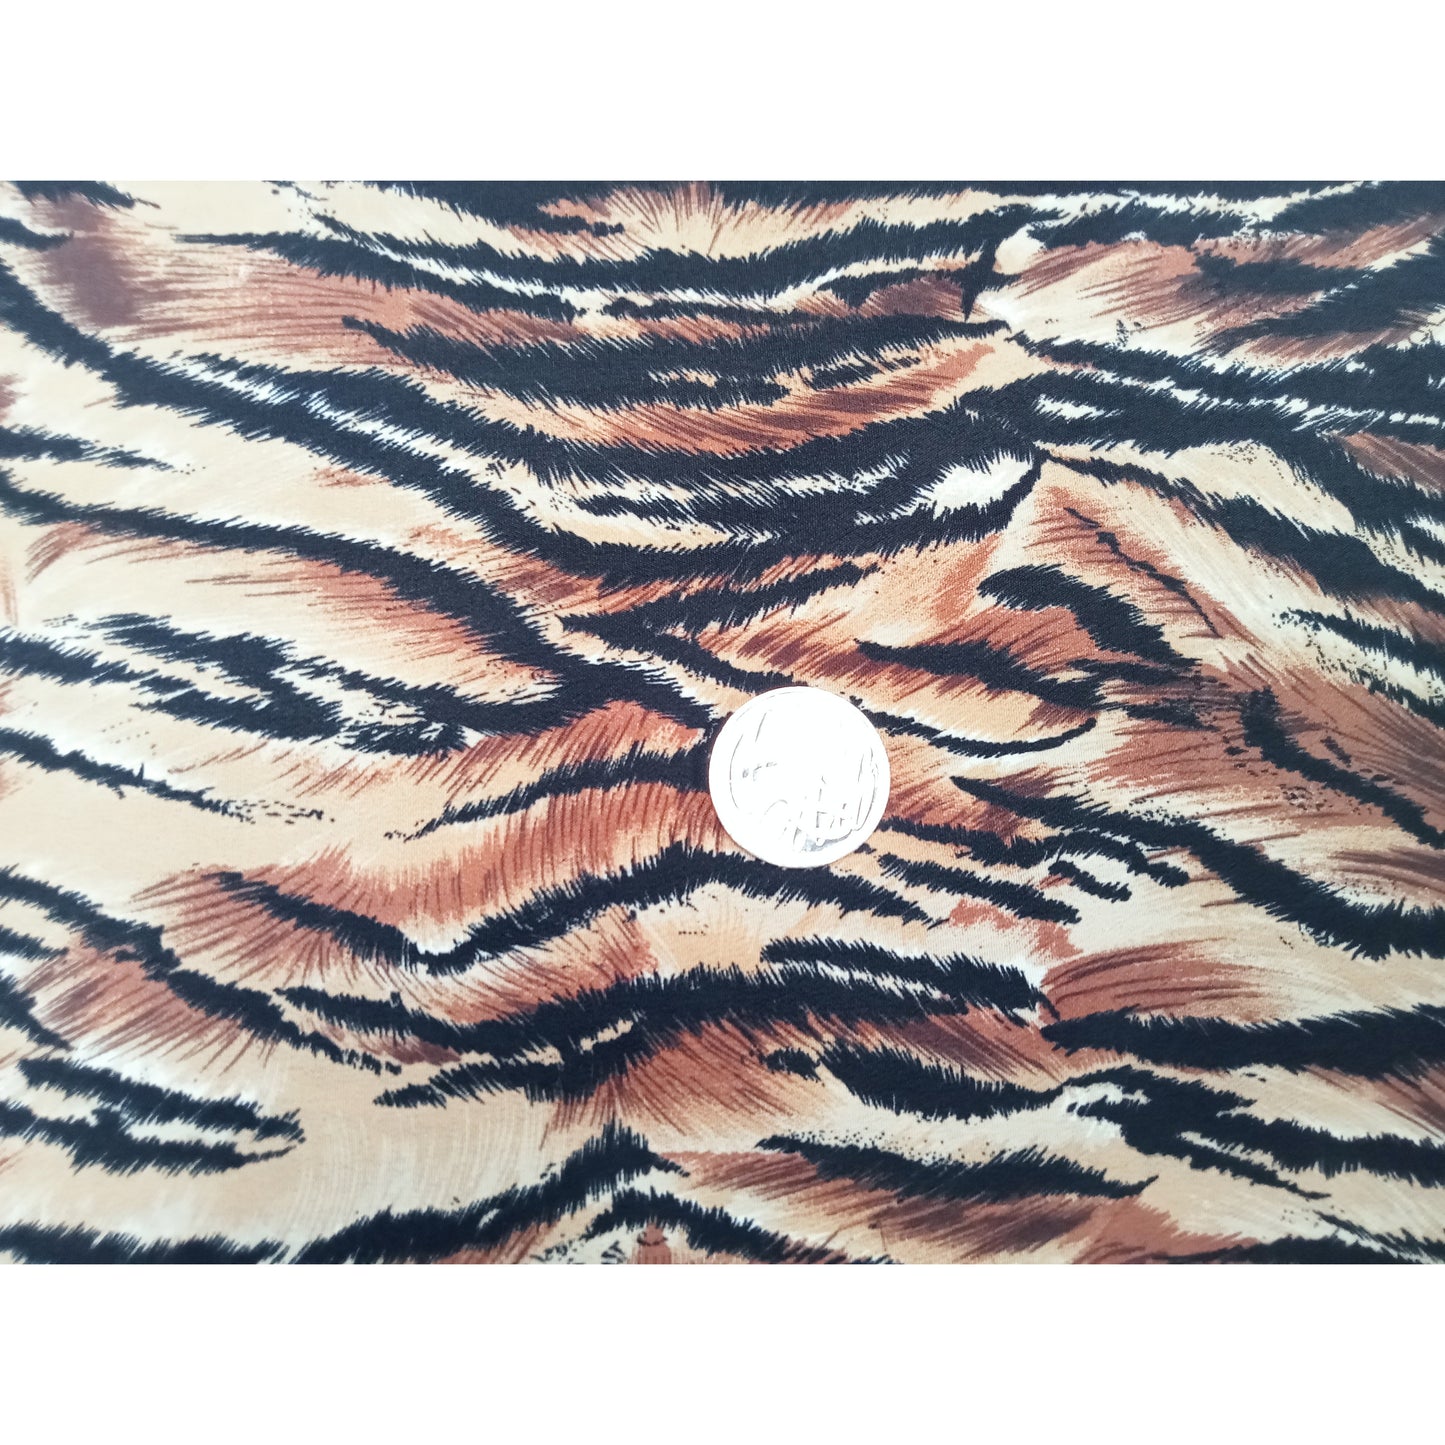 Tiger printed crepe fabric - 2.80mtrs